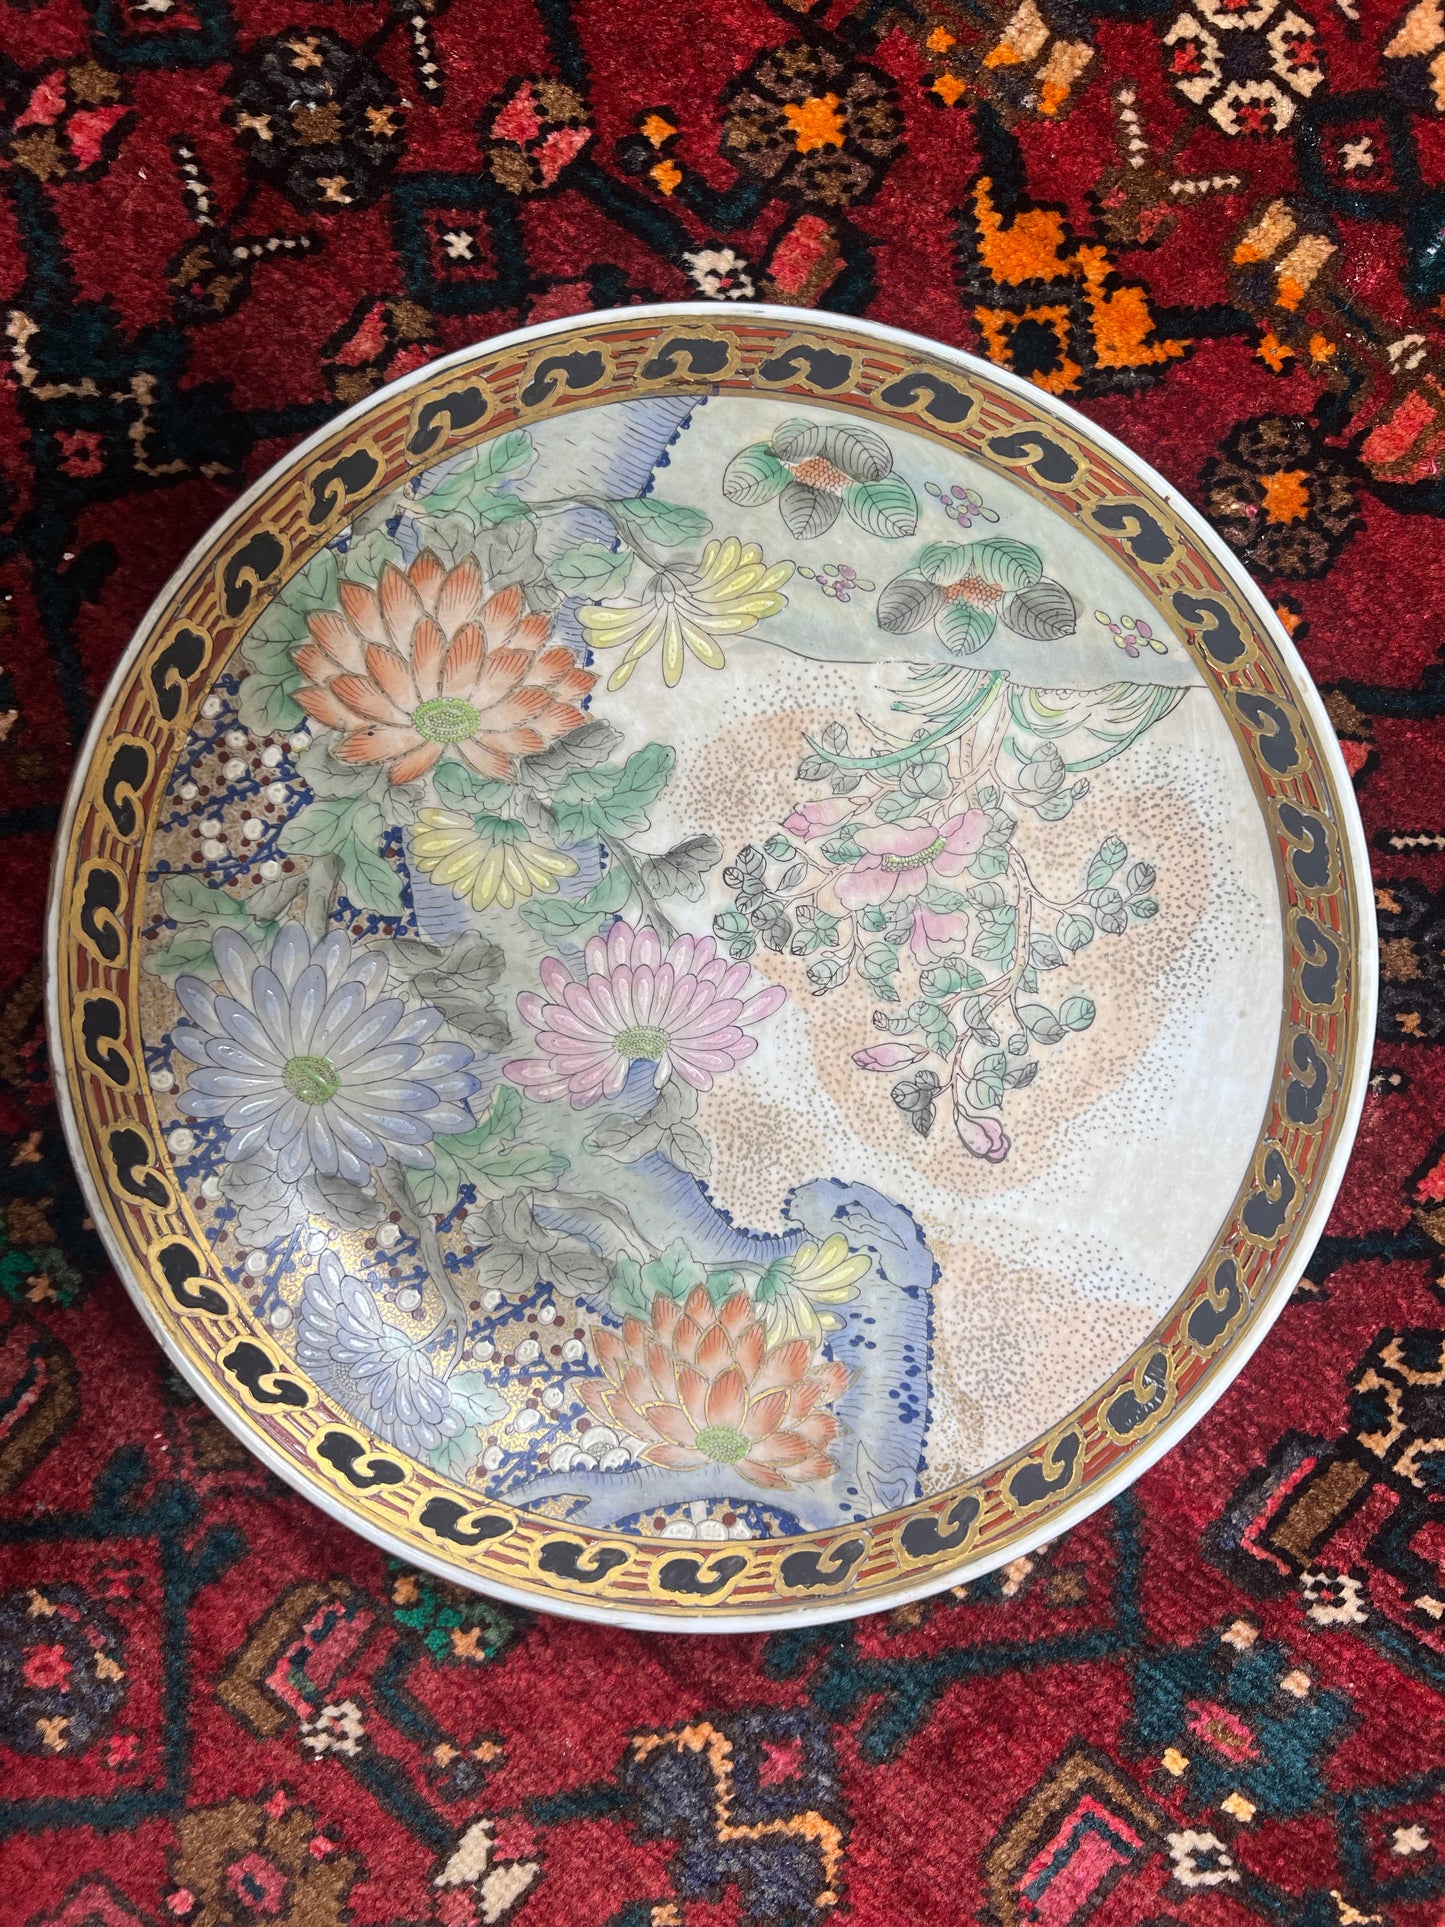 Stunning Large Shallow Chinoiserie Hand Painted Centerpiece Bowl